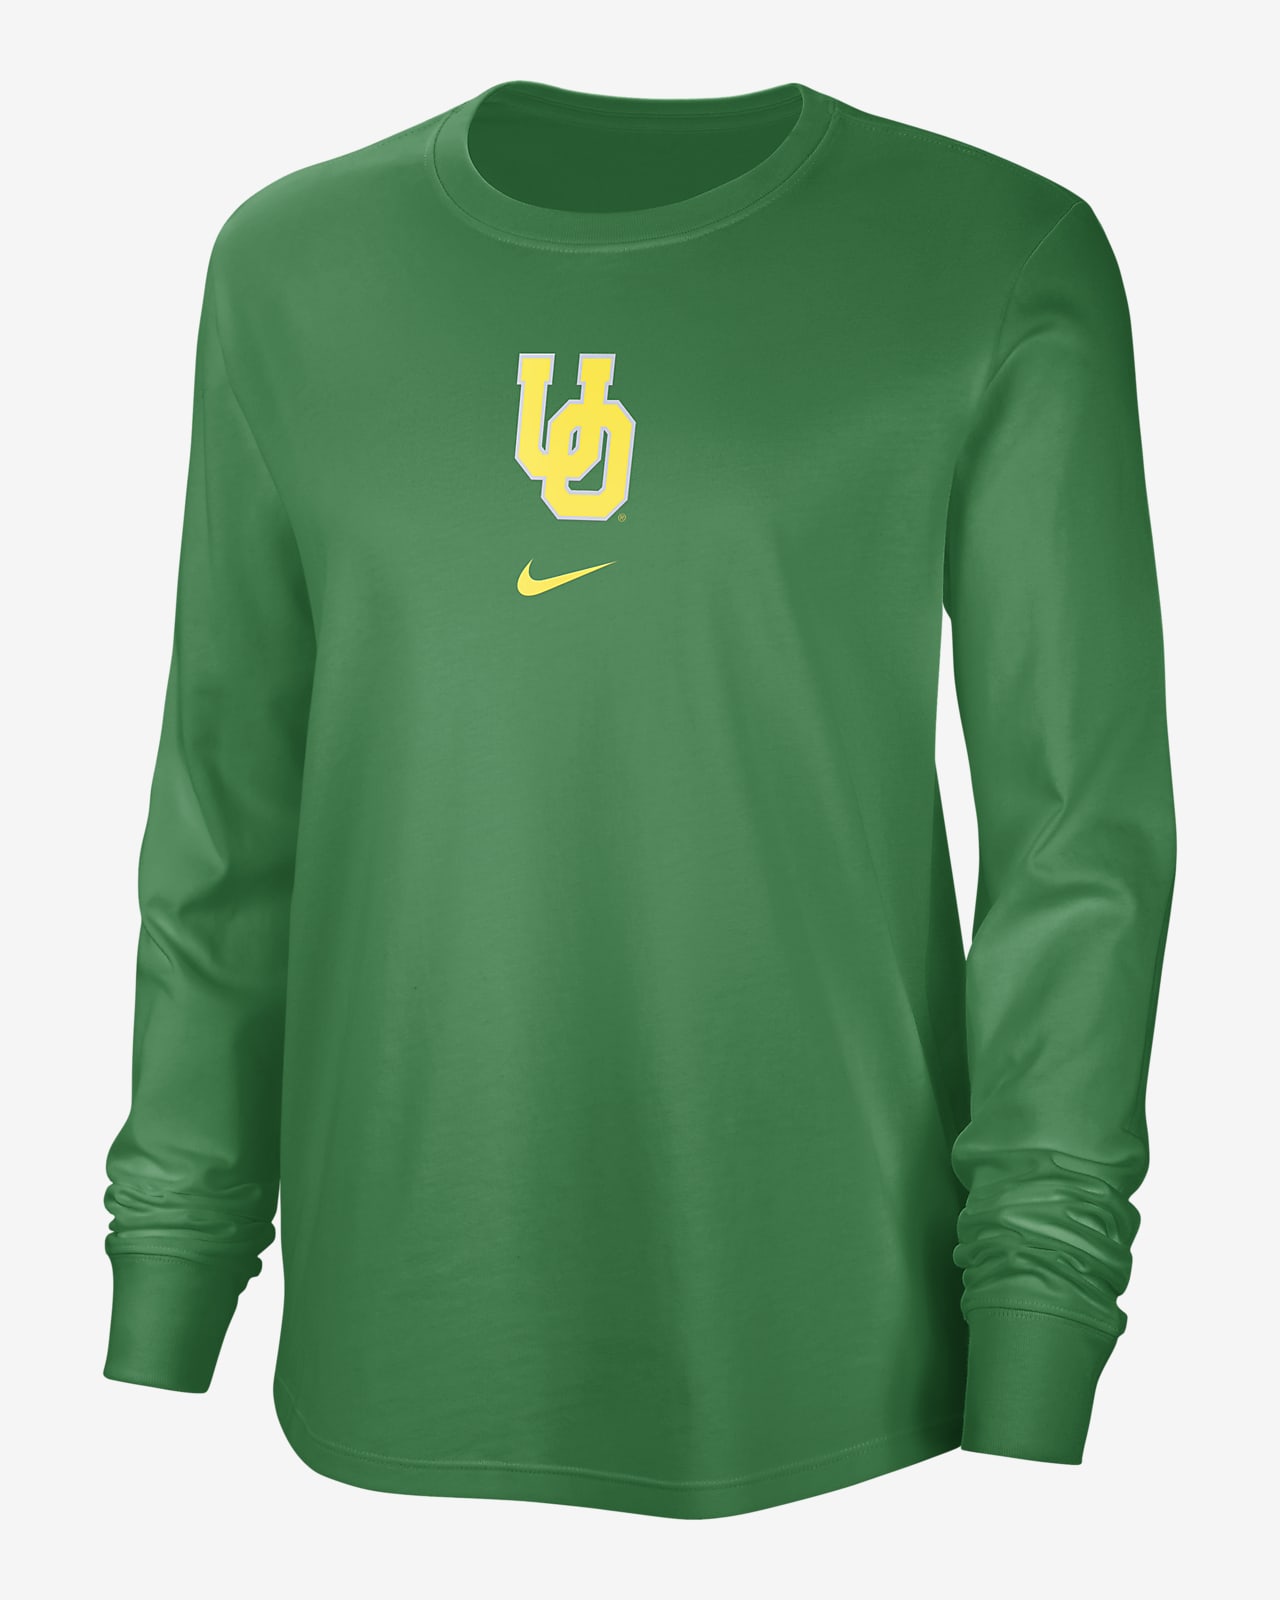 Nike Dri-Fit Long Sleeve T-Shirt in White, Navy and Gold – Moeller Spirit  Shop